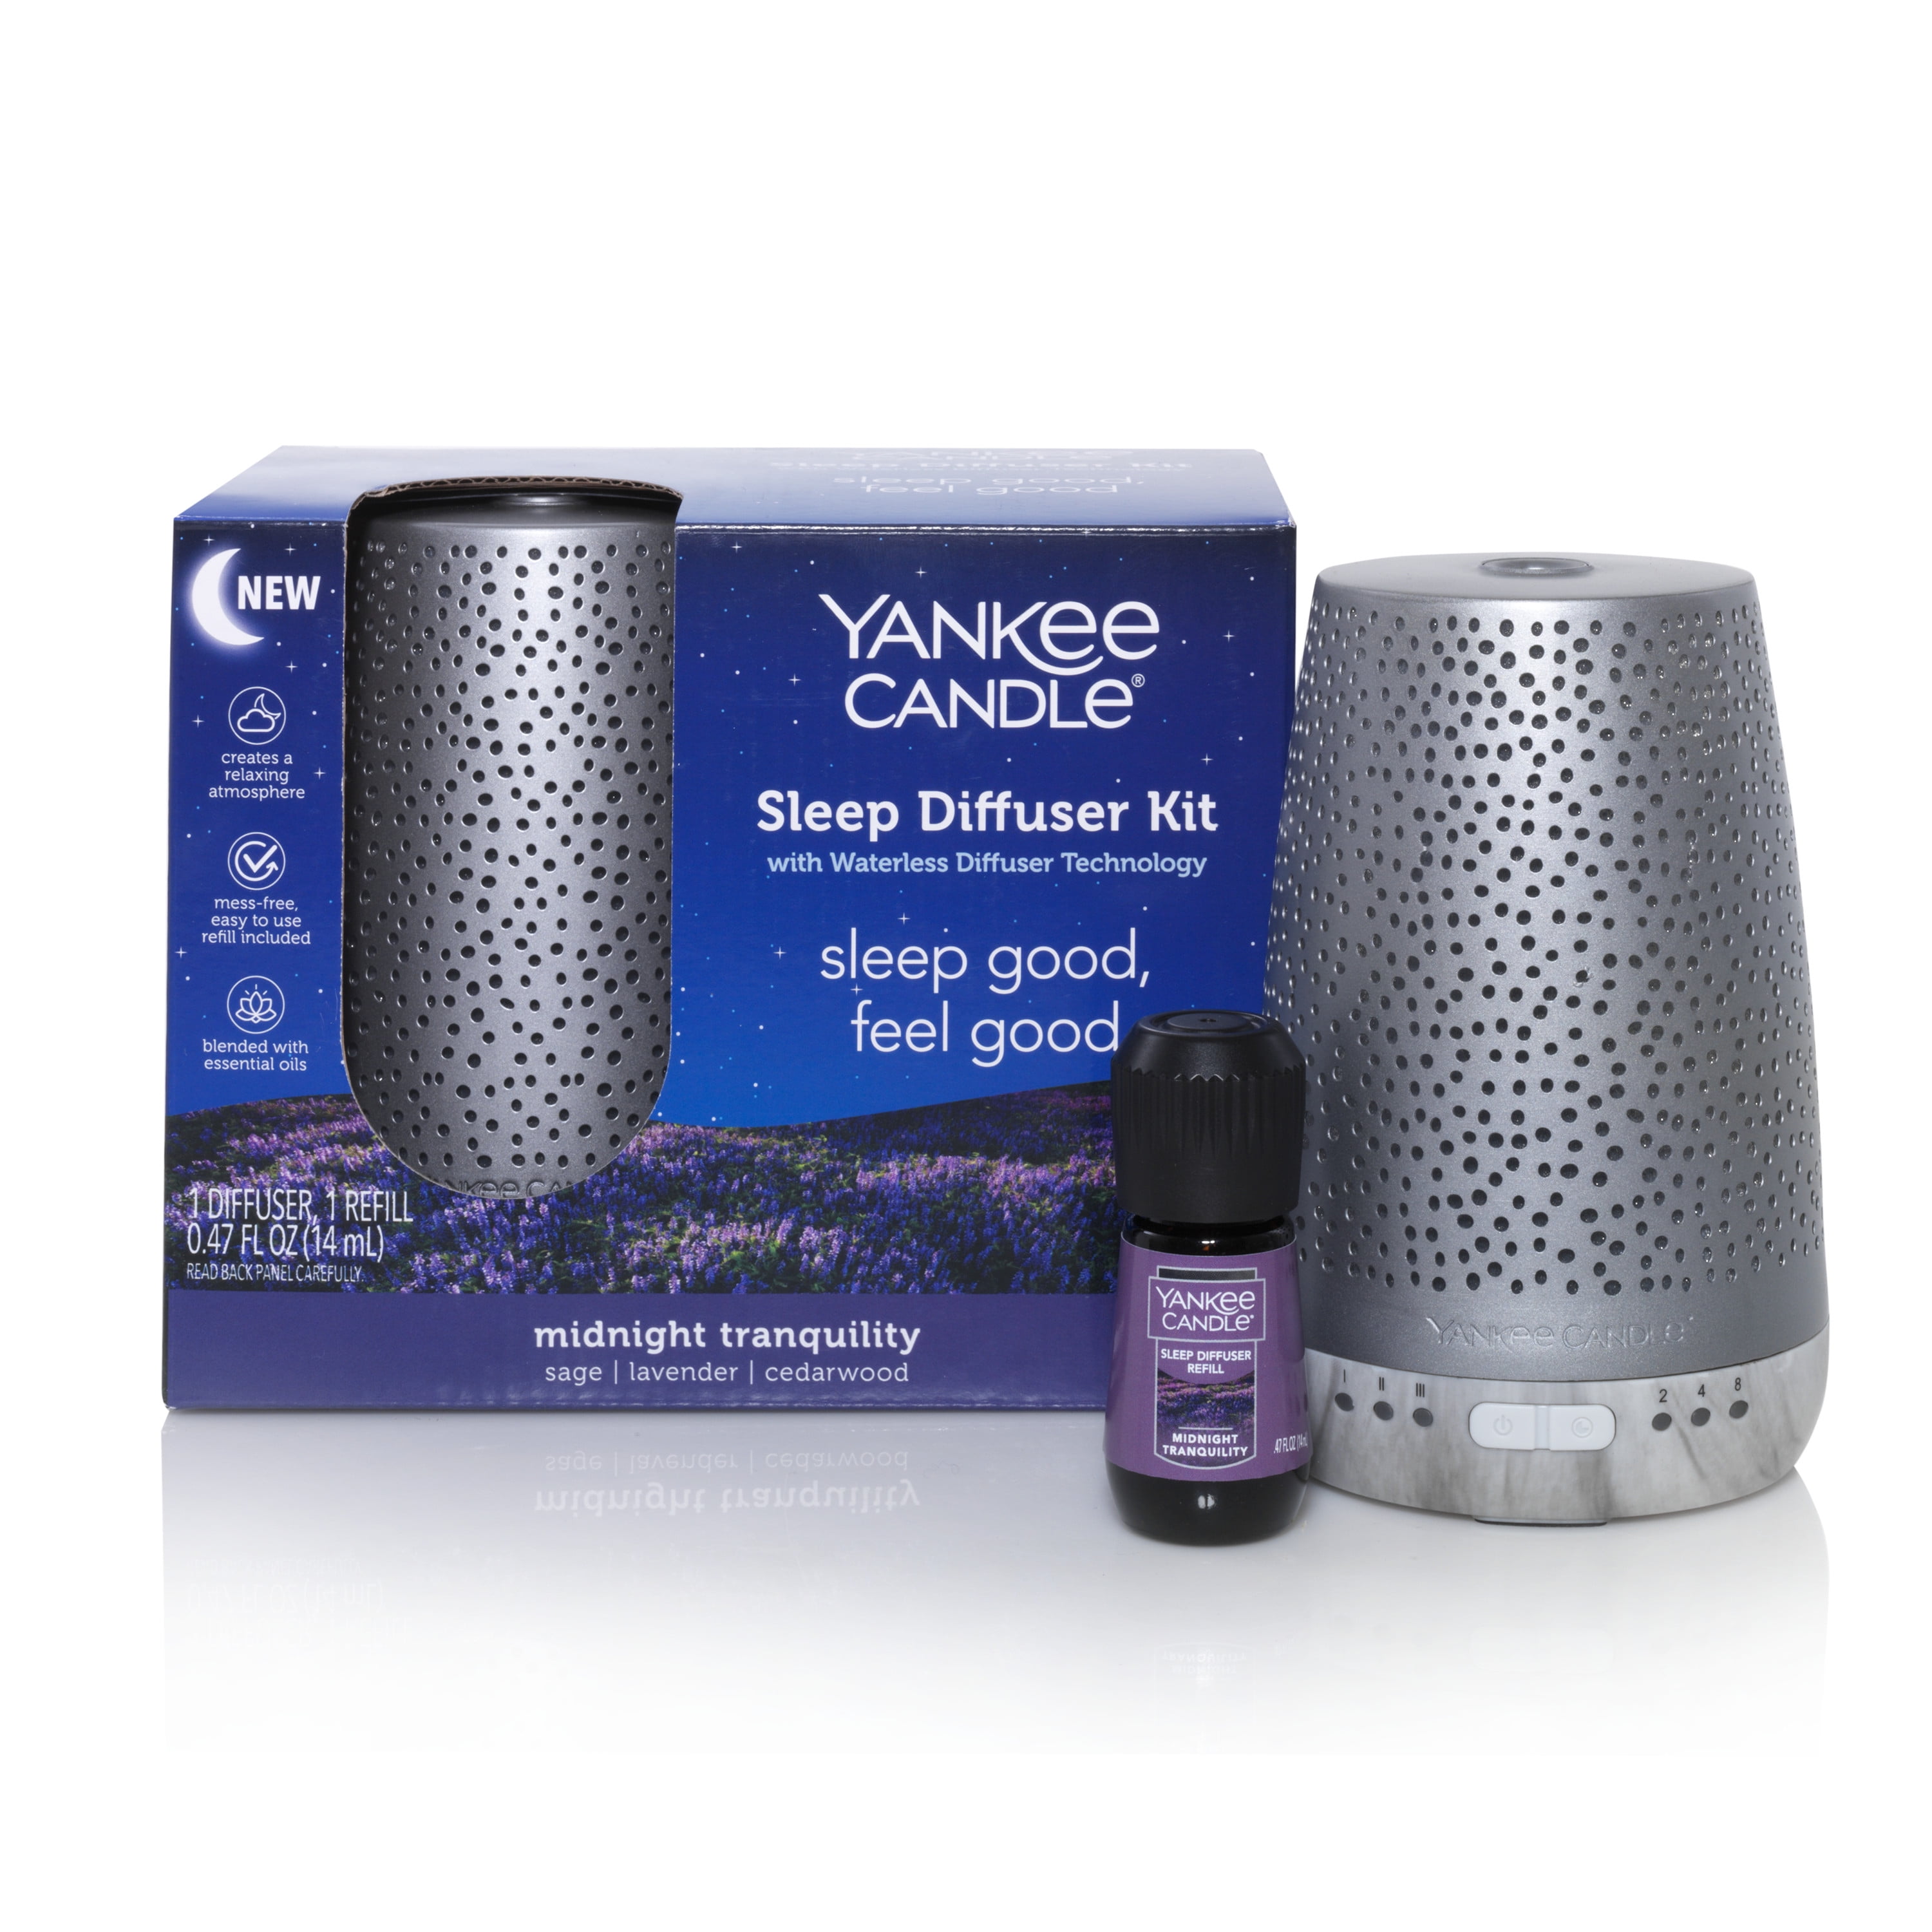 Yankee Candle Sleep Diffuser Kit Silver, Includes Diffuser for